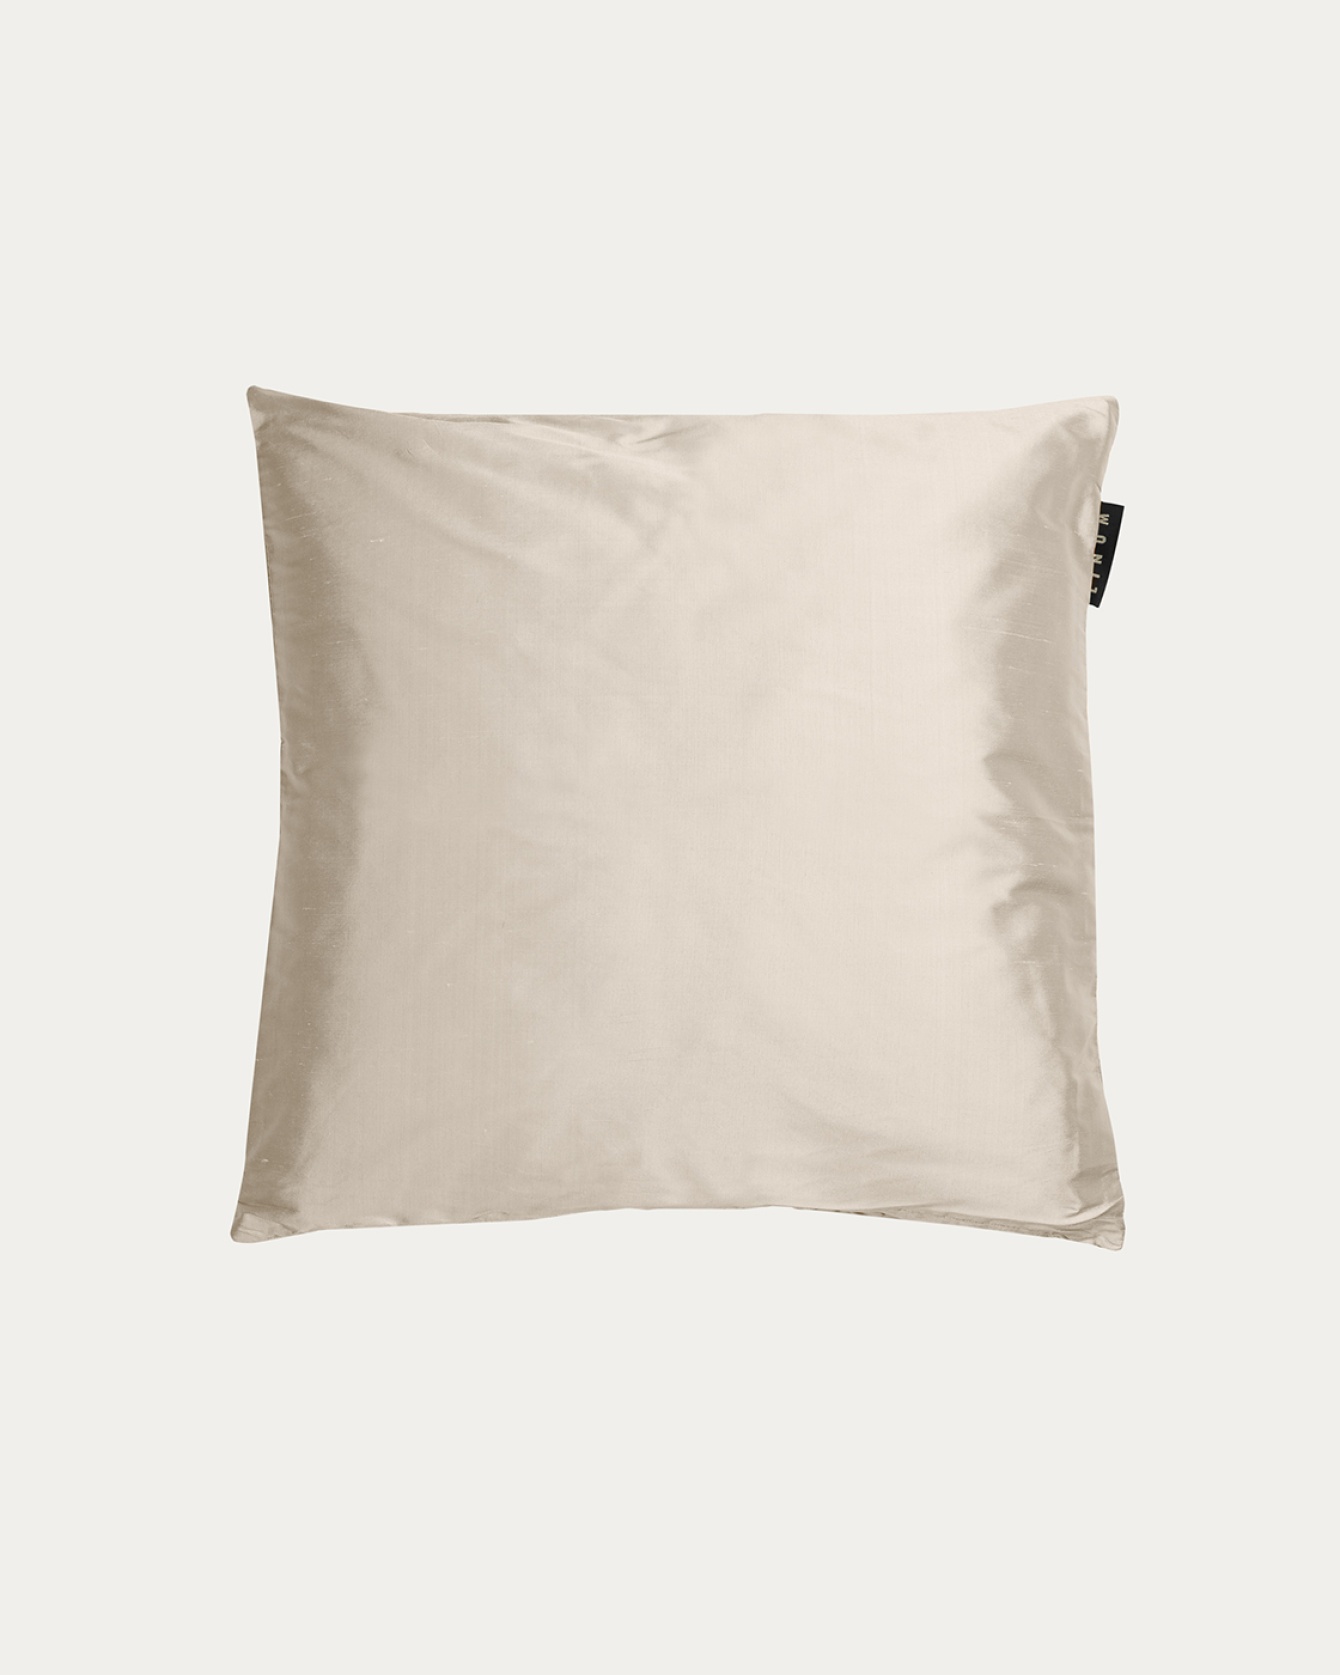 Product image light beige SILK cushion cover made of 100% dupion silk that gives a nice lustre from LINUM DESIGN. Size 40x40 cm.